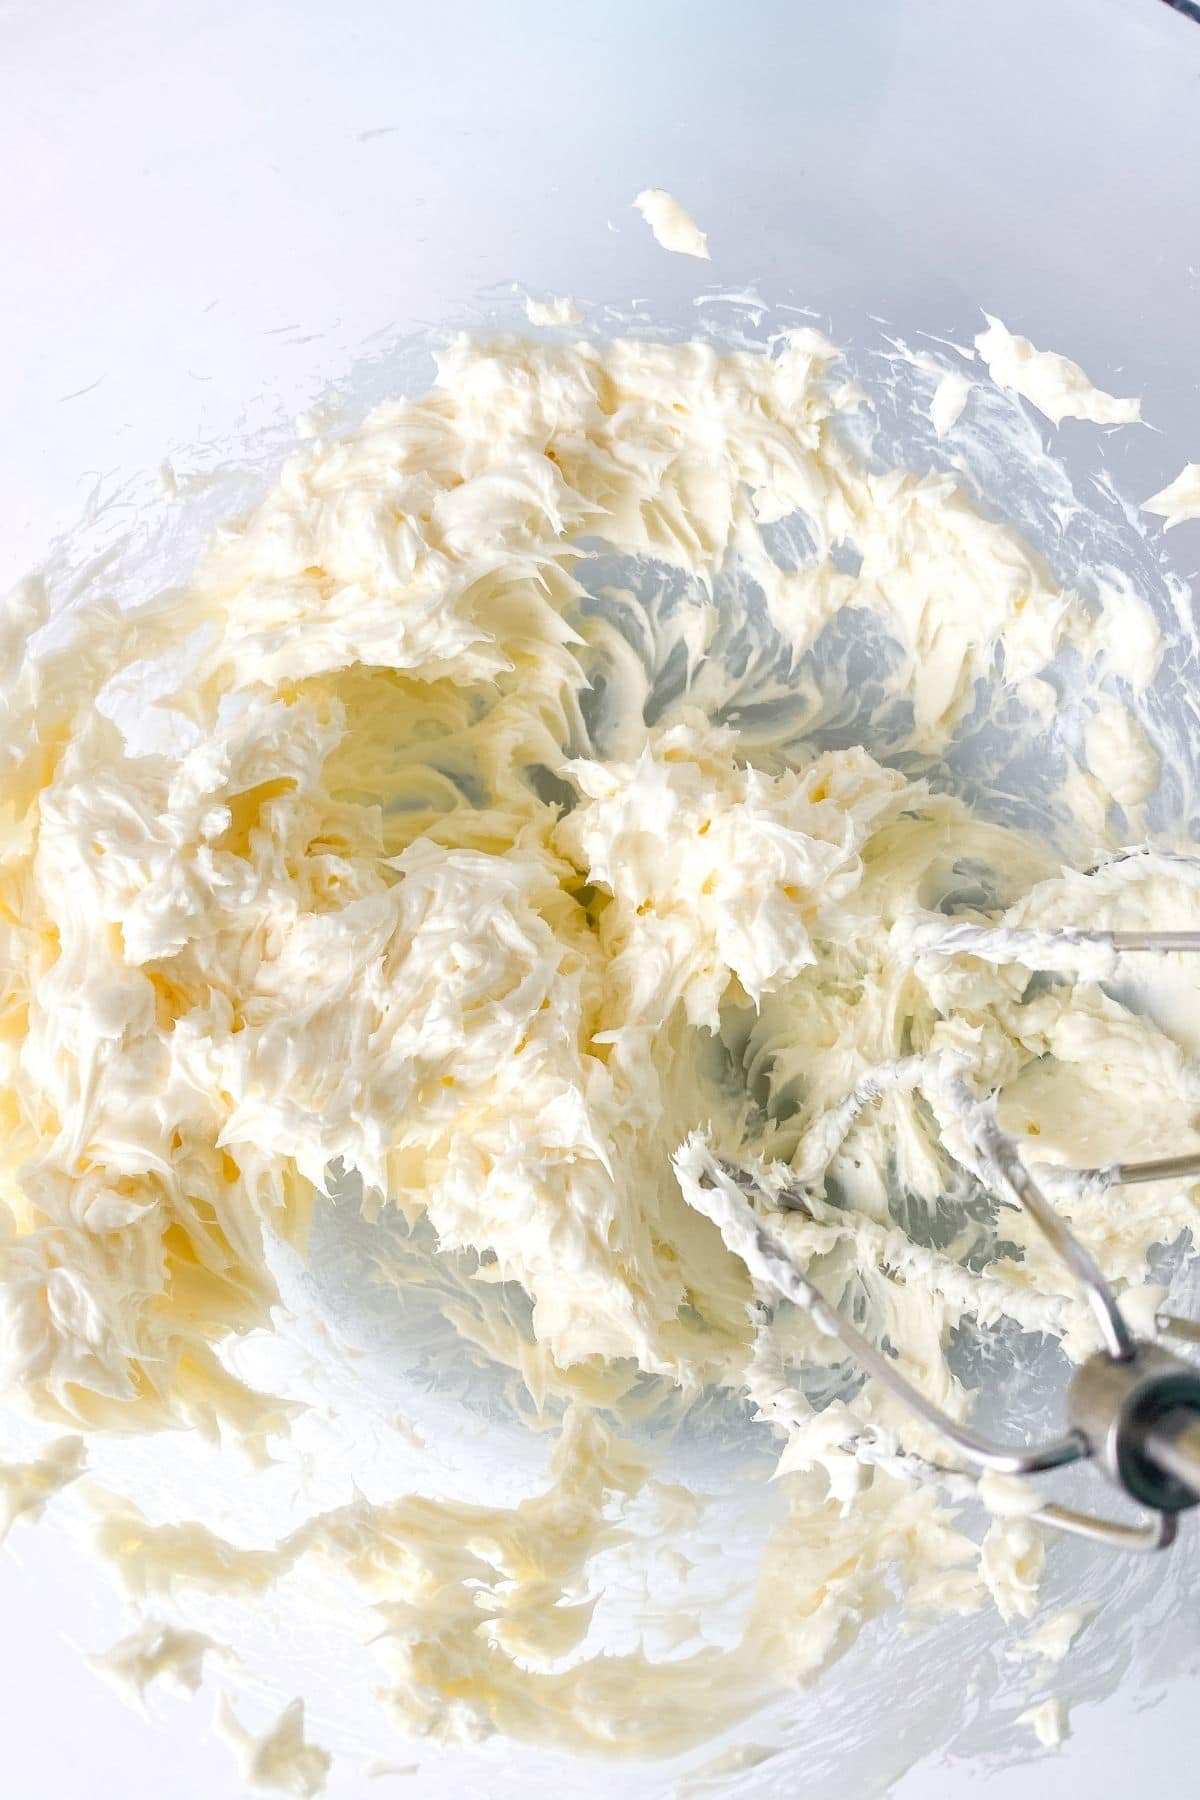 Creamed icing mixture